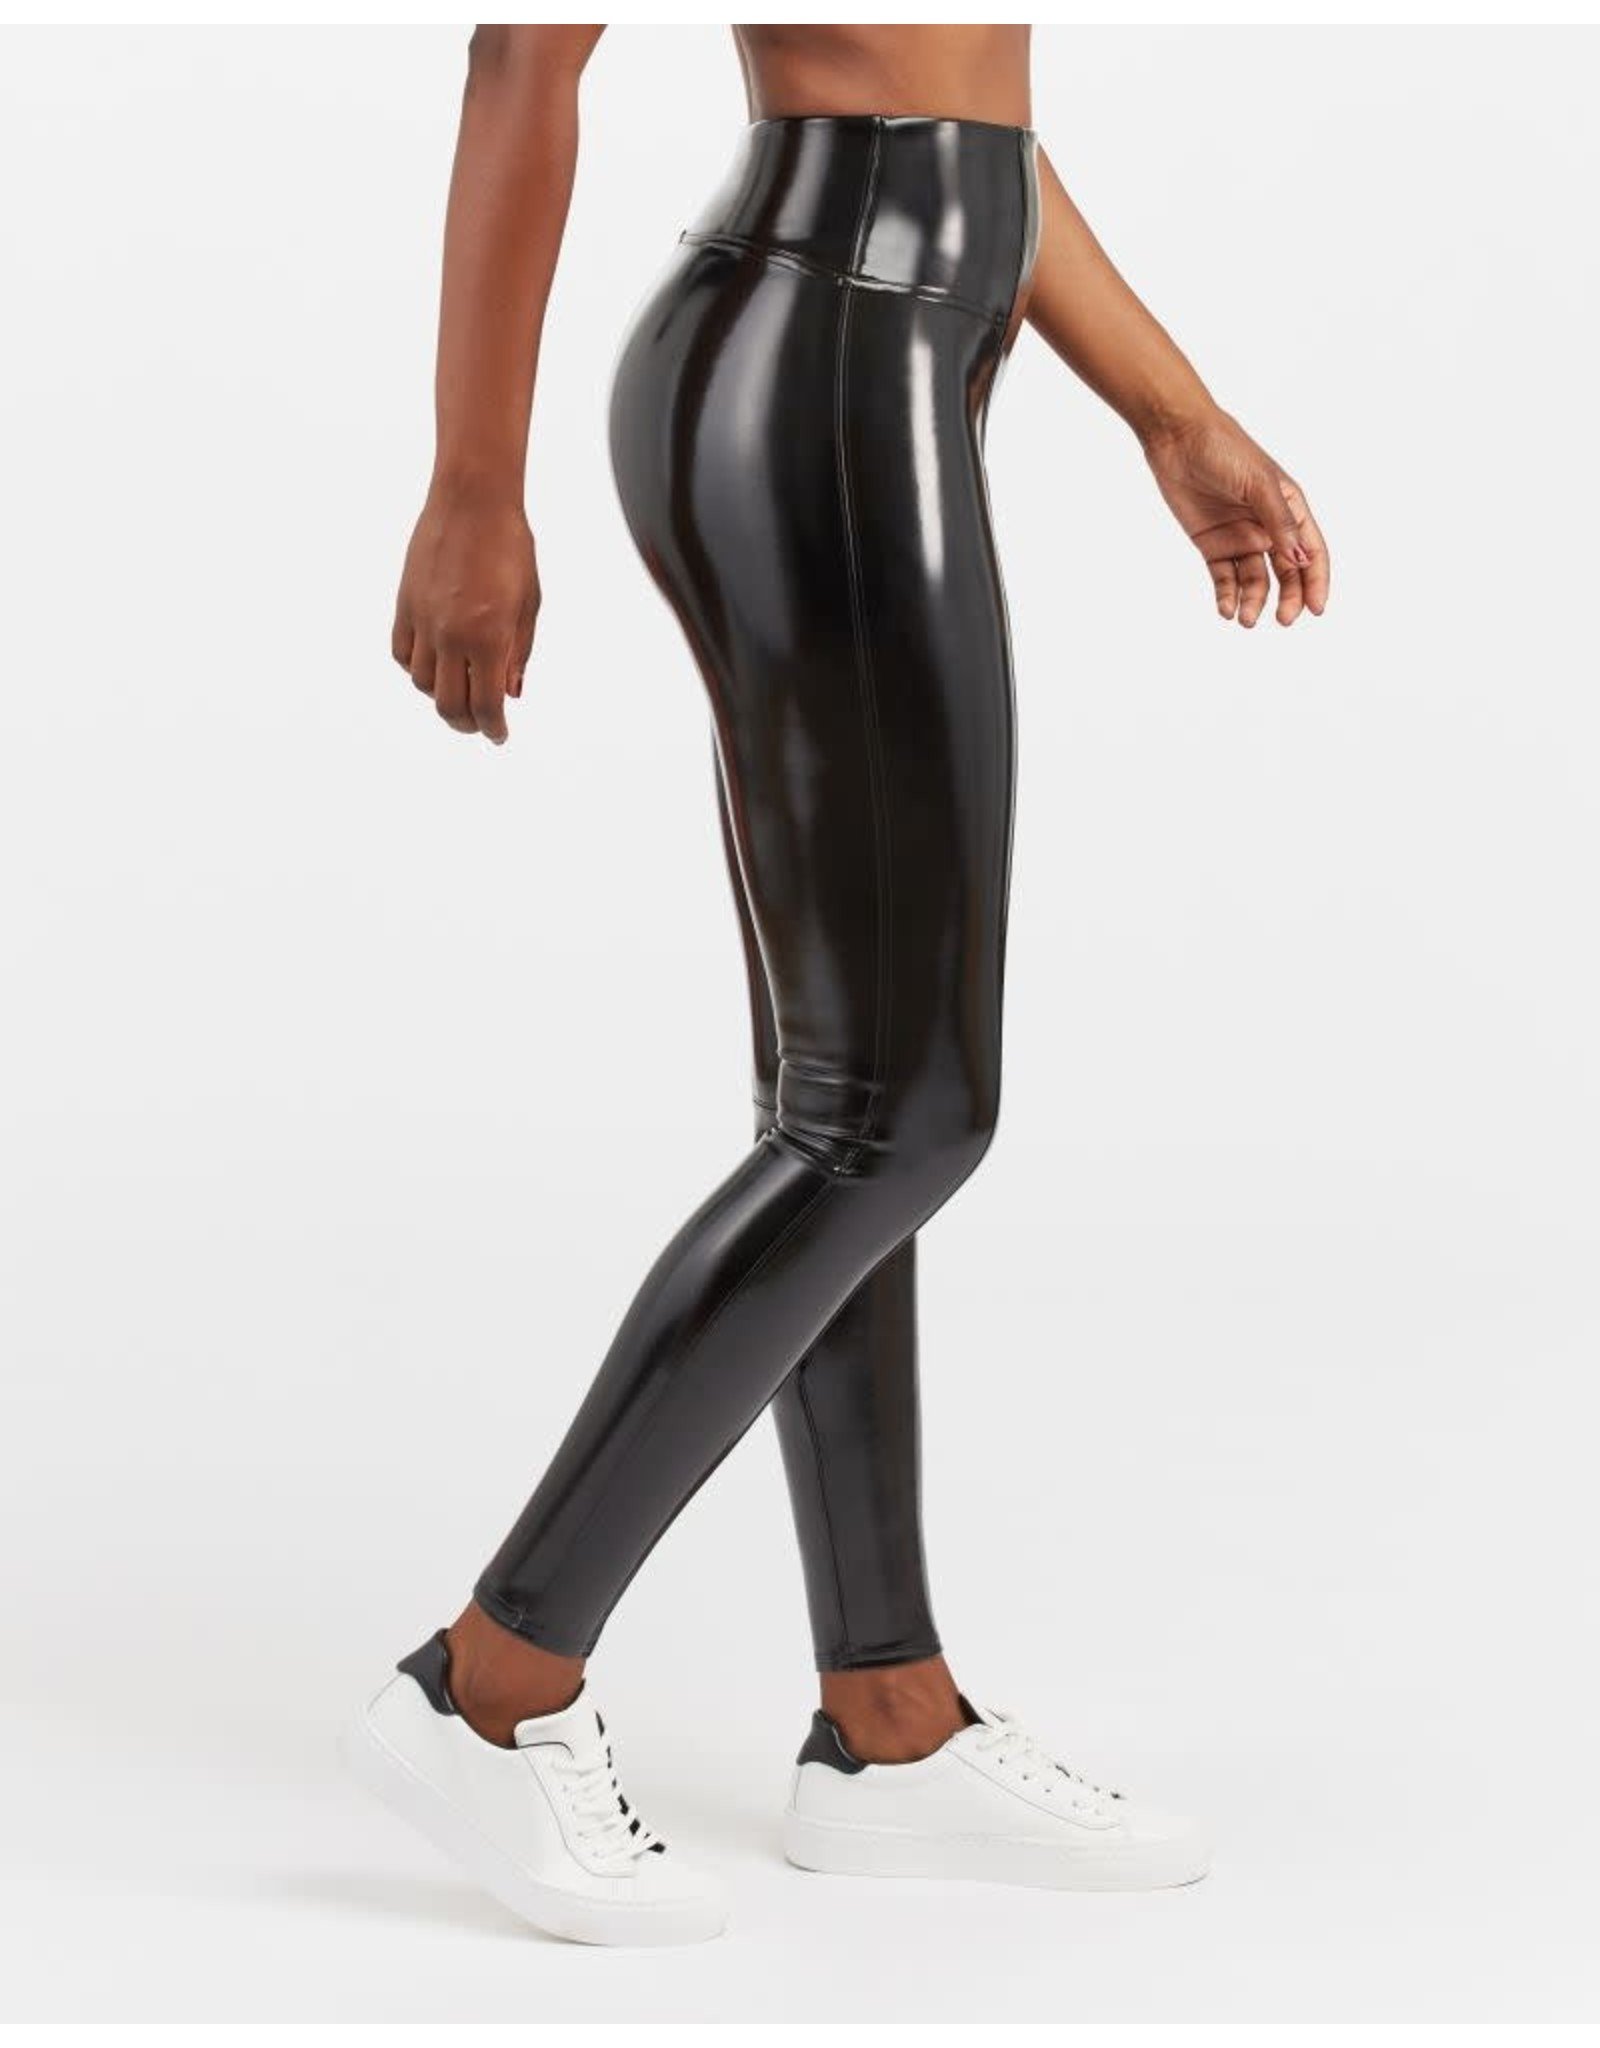 Should You Size Up Or Down In Spanx Leggings